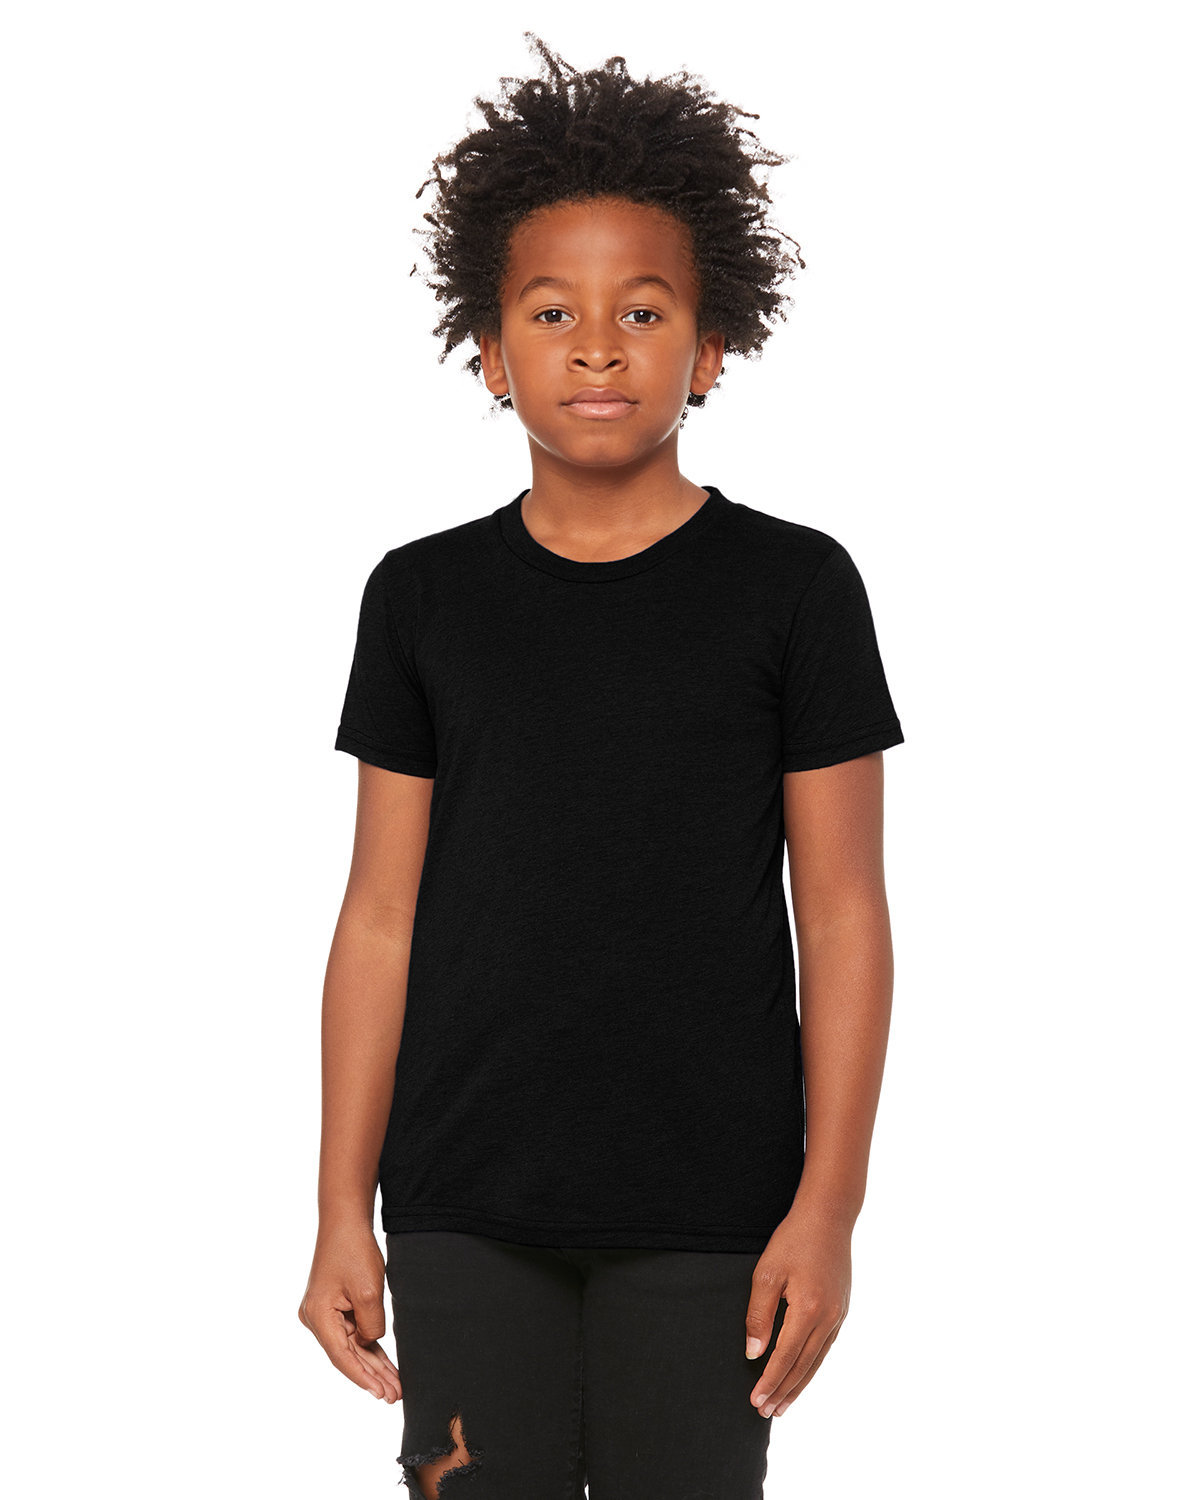 Bella + Canvas Youth Triblend Short-Sleeve T-Shirt SOLID BLK TRBLND 